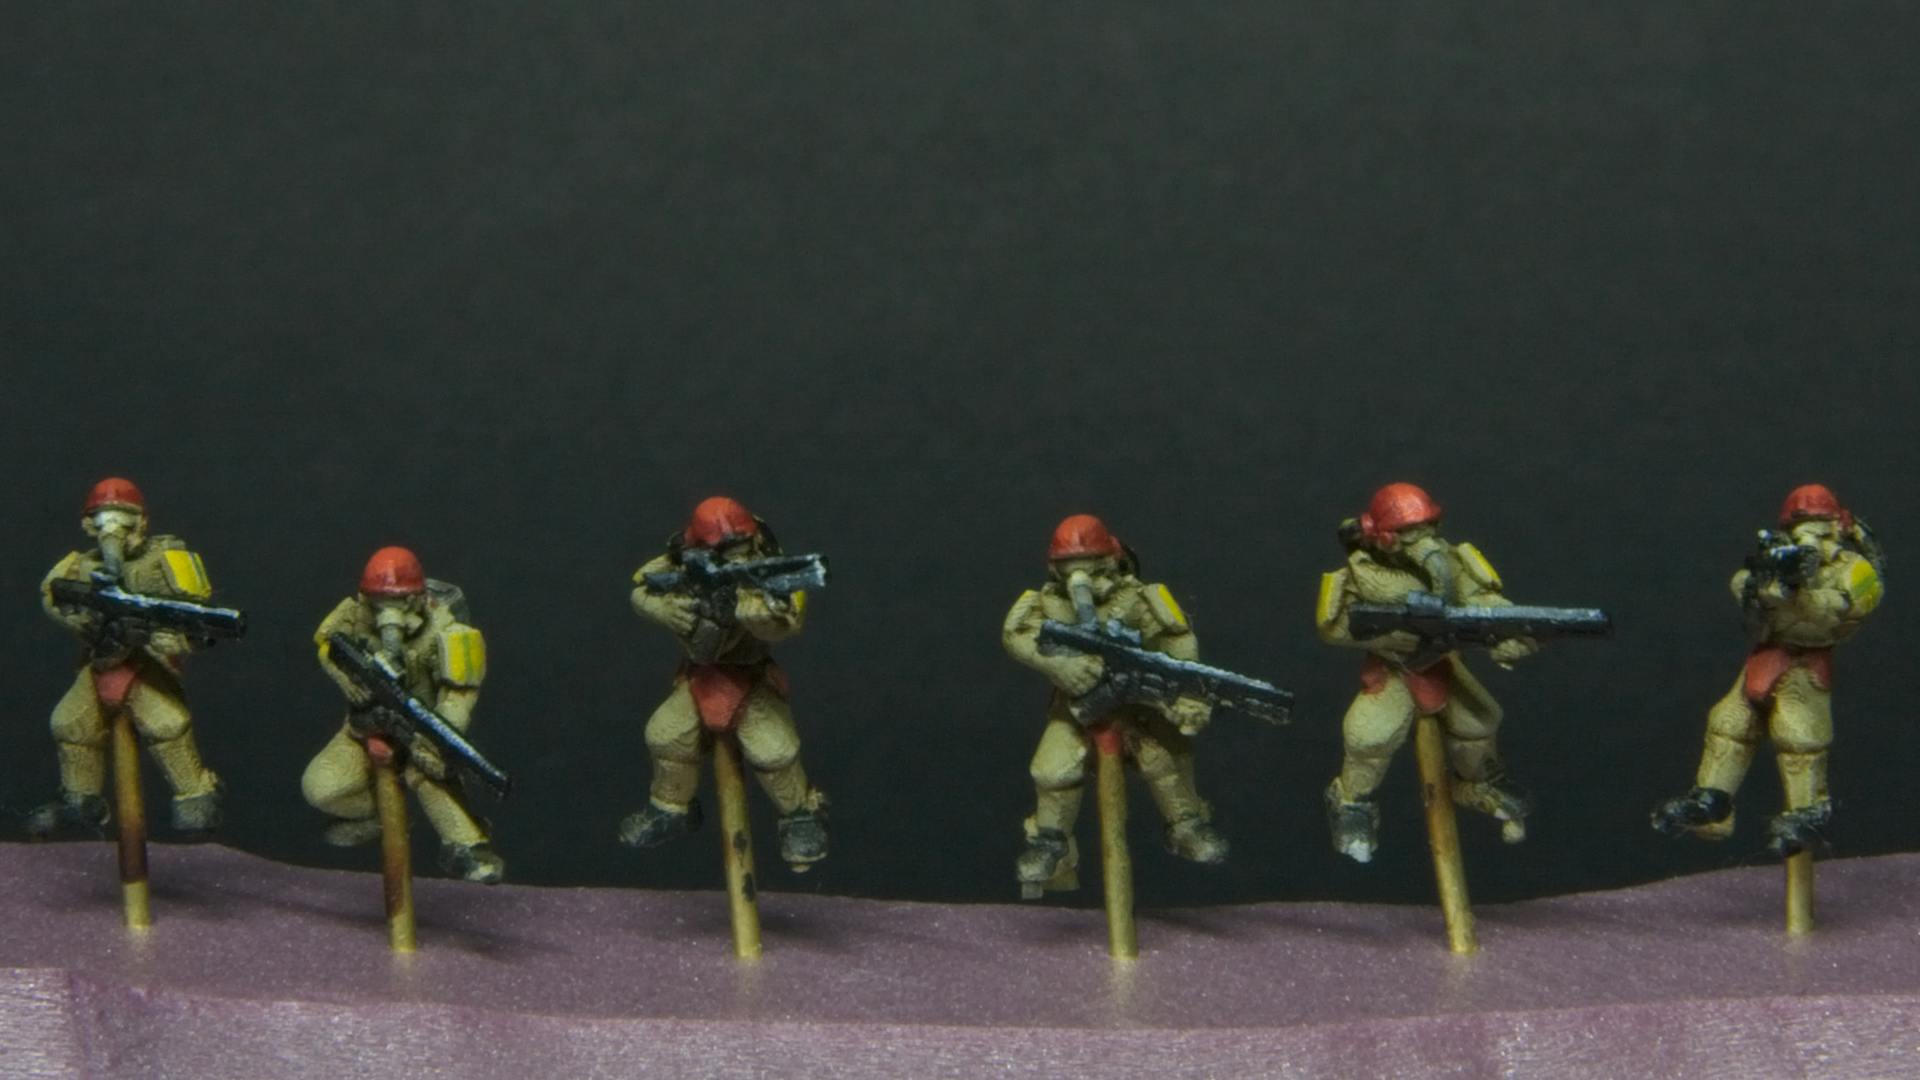 Tiny futuristic soldiers with yellow armor pads, and red helmets.